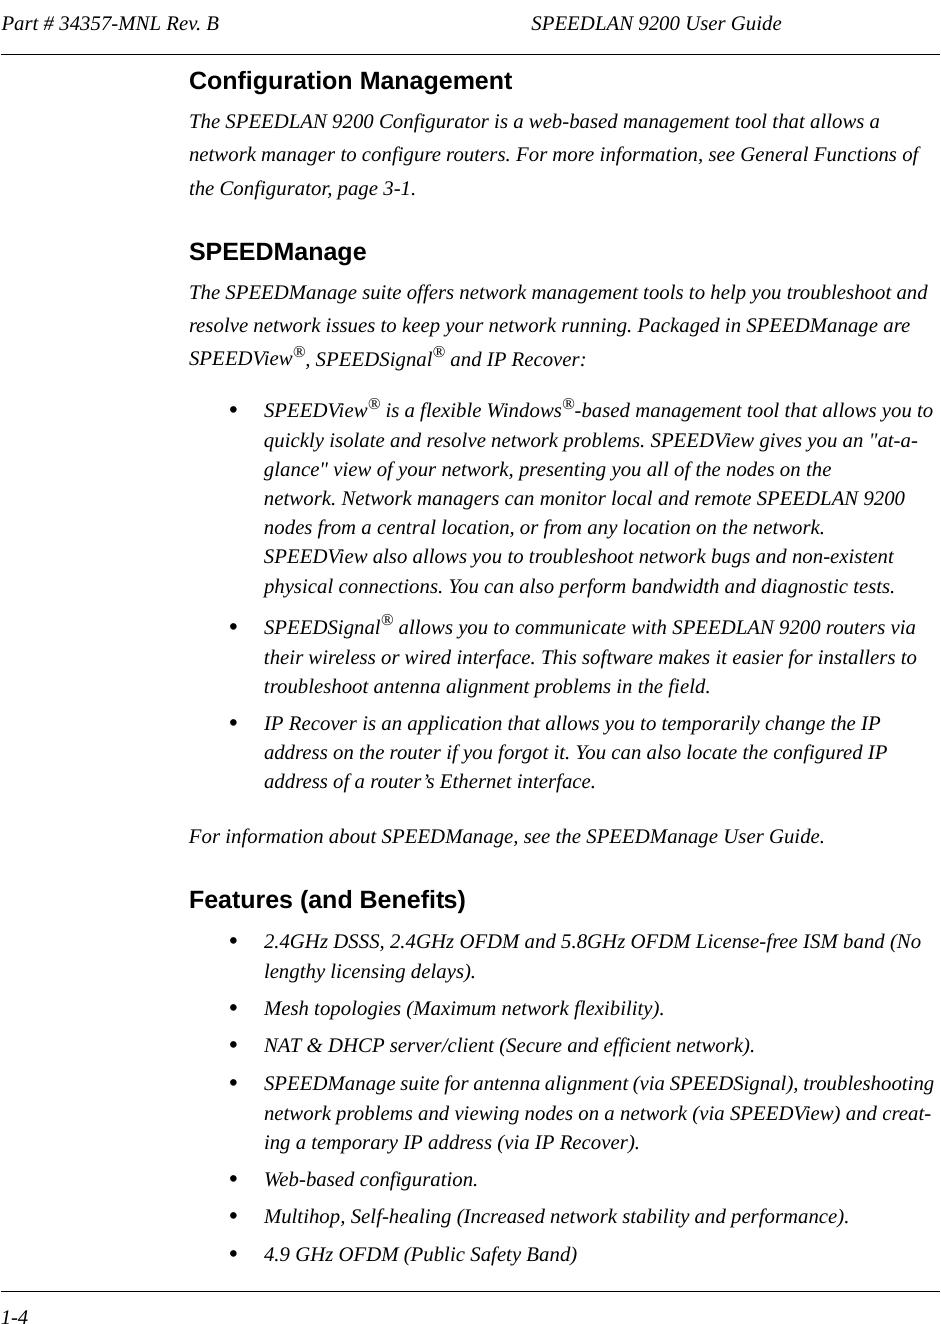 Part # 34357-MNL Rev. B                                                            SPEEDLAN 9200 User Guide 1-4Configuration ManagementThe SPEEDLAN 9200 Configurator is a web-based management tool that allows a network manager to configure routers. For more information, see General Functions of the Configurator, page 3-1. SPEEDManageThe SPEEDManage suite offers network management tools to help you troubleshoot and resolve network issues to keep your network running. Packaged in SPEEDManage are SPEEDView®, SPEEDSignal® and IP Recover:•SPEEDView® is a flexible Windows®-based management tool that allows you to quickly isolate and resolve network problems. SPEEDView gives you an &quot;at-a-glance&quot; view of your network, presenting you all of the nodes on the network. Network managers can monitor local and remote SPEEDLAN 9200 nodes from a central location, or from any location on the network. SPEEDView also allows you to troubleshoot network bugs and non-existent physical connections. You can also perform bandwidth and diagnostic tests. •SPEEDSignal® allows you to communicate with SPEEDLAN 9200 routers via their wireless or wired interface. This software makes it easier for installers to troubleshoot antenna alignment problems in the field.   •IP Recover is an application that allows you to temporarily change the IP address on the router if you forgot it. You can also locate the configured IP address of a router’s Ethernet interface.For information about SPEEDManage, see the SPEEDManage User Guide.Features (and Benefits)•2.4GHz DSSS, 2.4GHz OFDM and 5.8GHz OFDM License-free ISM band (No lengthy licensing delays).•Mesh topologies (Maximum network flexibility).•NAT &amp; DHCP server/client (Secure and efficient network).•SPEEDManage suite for antenna alignment (via SPEEDSignal), troubleshooting network problems and viewing nodes on a network (via SPEEDView) and creat-ing a temporary IP address (via IP Recover).•Web-based configuration.•Multihop, Self-healing (Increased network stability and performance).•4.9 GHz OFDM (Public Safety Band)